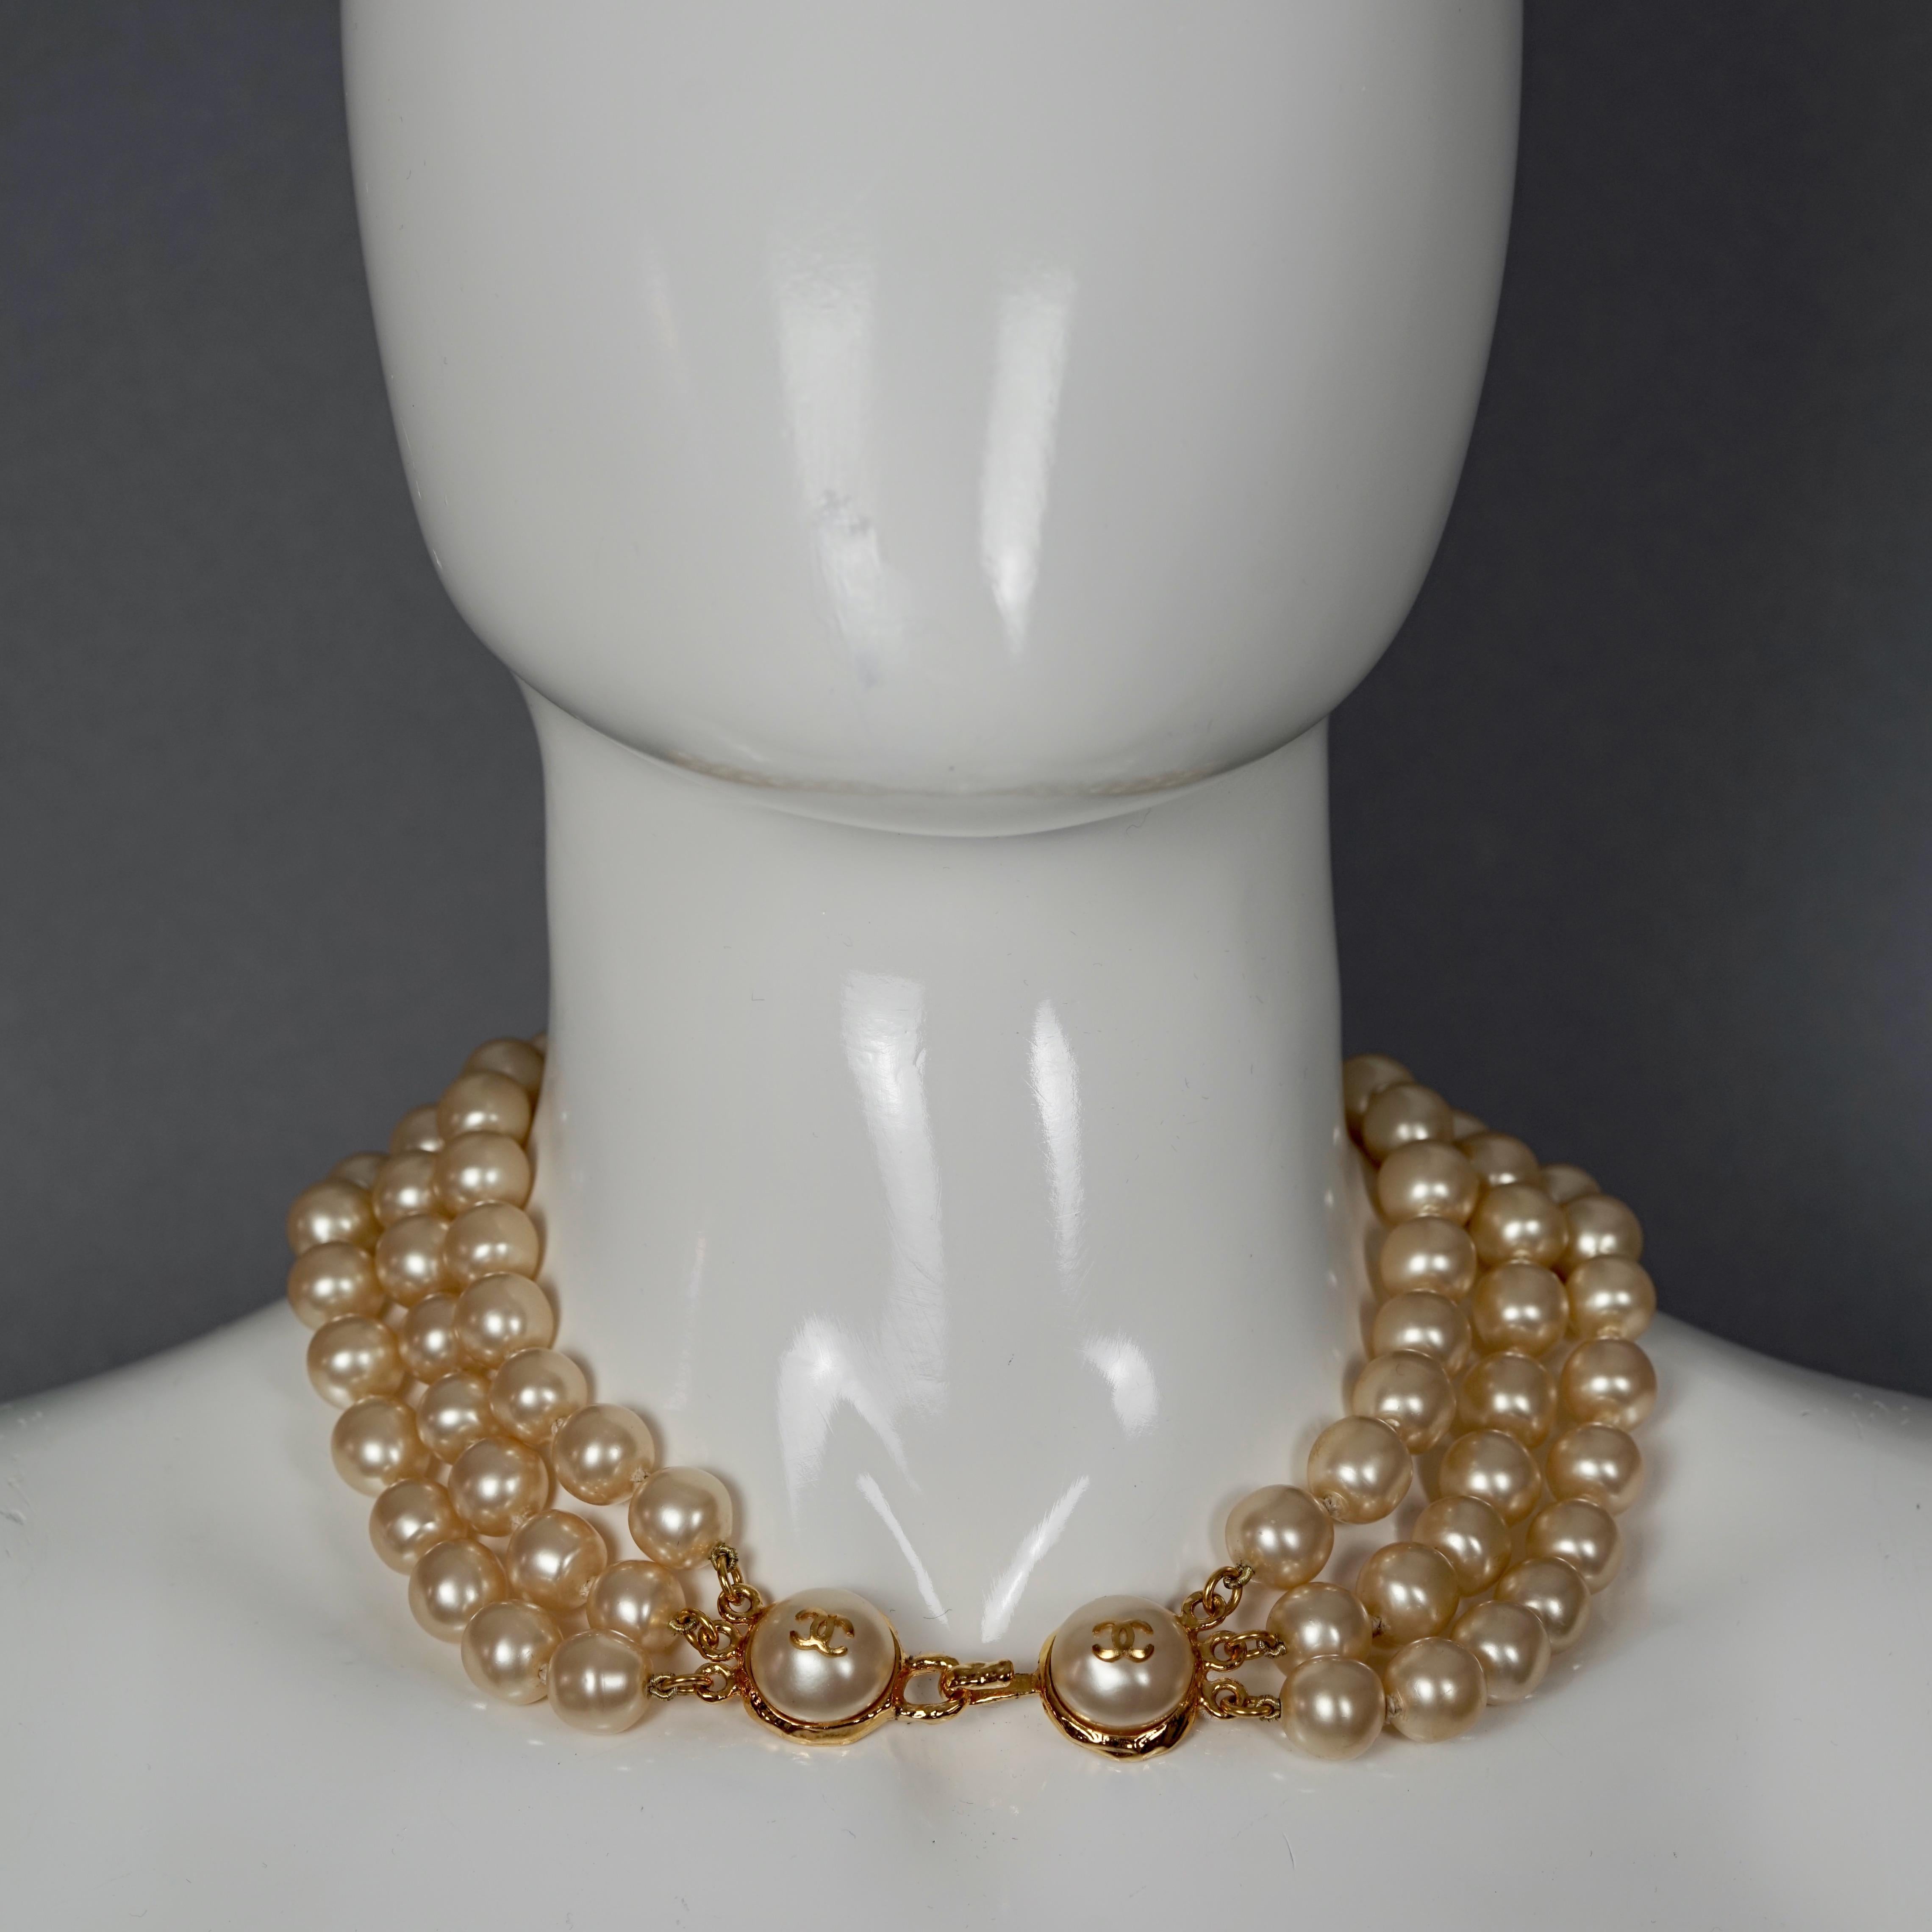 Vintage CHANEL CC Logo Triple Strand Pearl Necklace

Measurements:
Drop Height: 2.75 inches  (7 cm)
Pearl Diameter: 0.47 inch (1.2 cm)
Wearable Length: 16.53 inches (42 cm)

Features:
- 100% Authentic CHANEL.
- Triple strand pearl necklace with CC